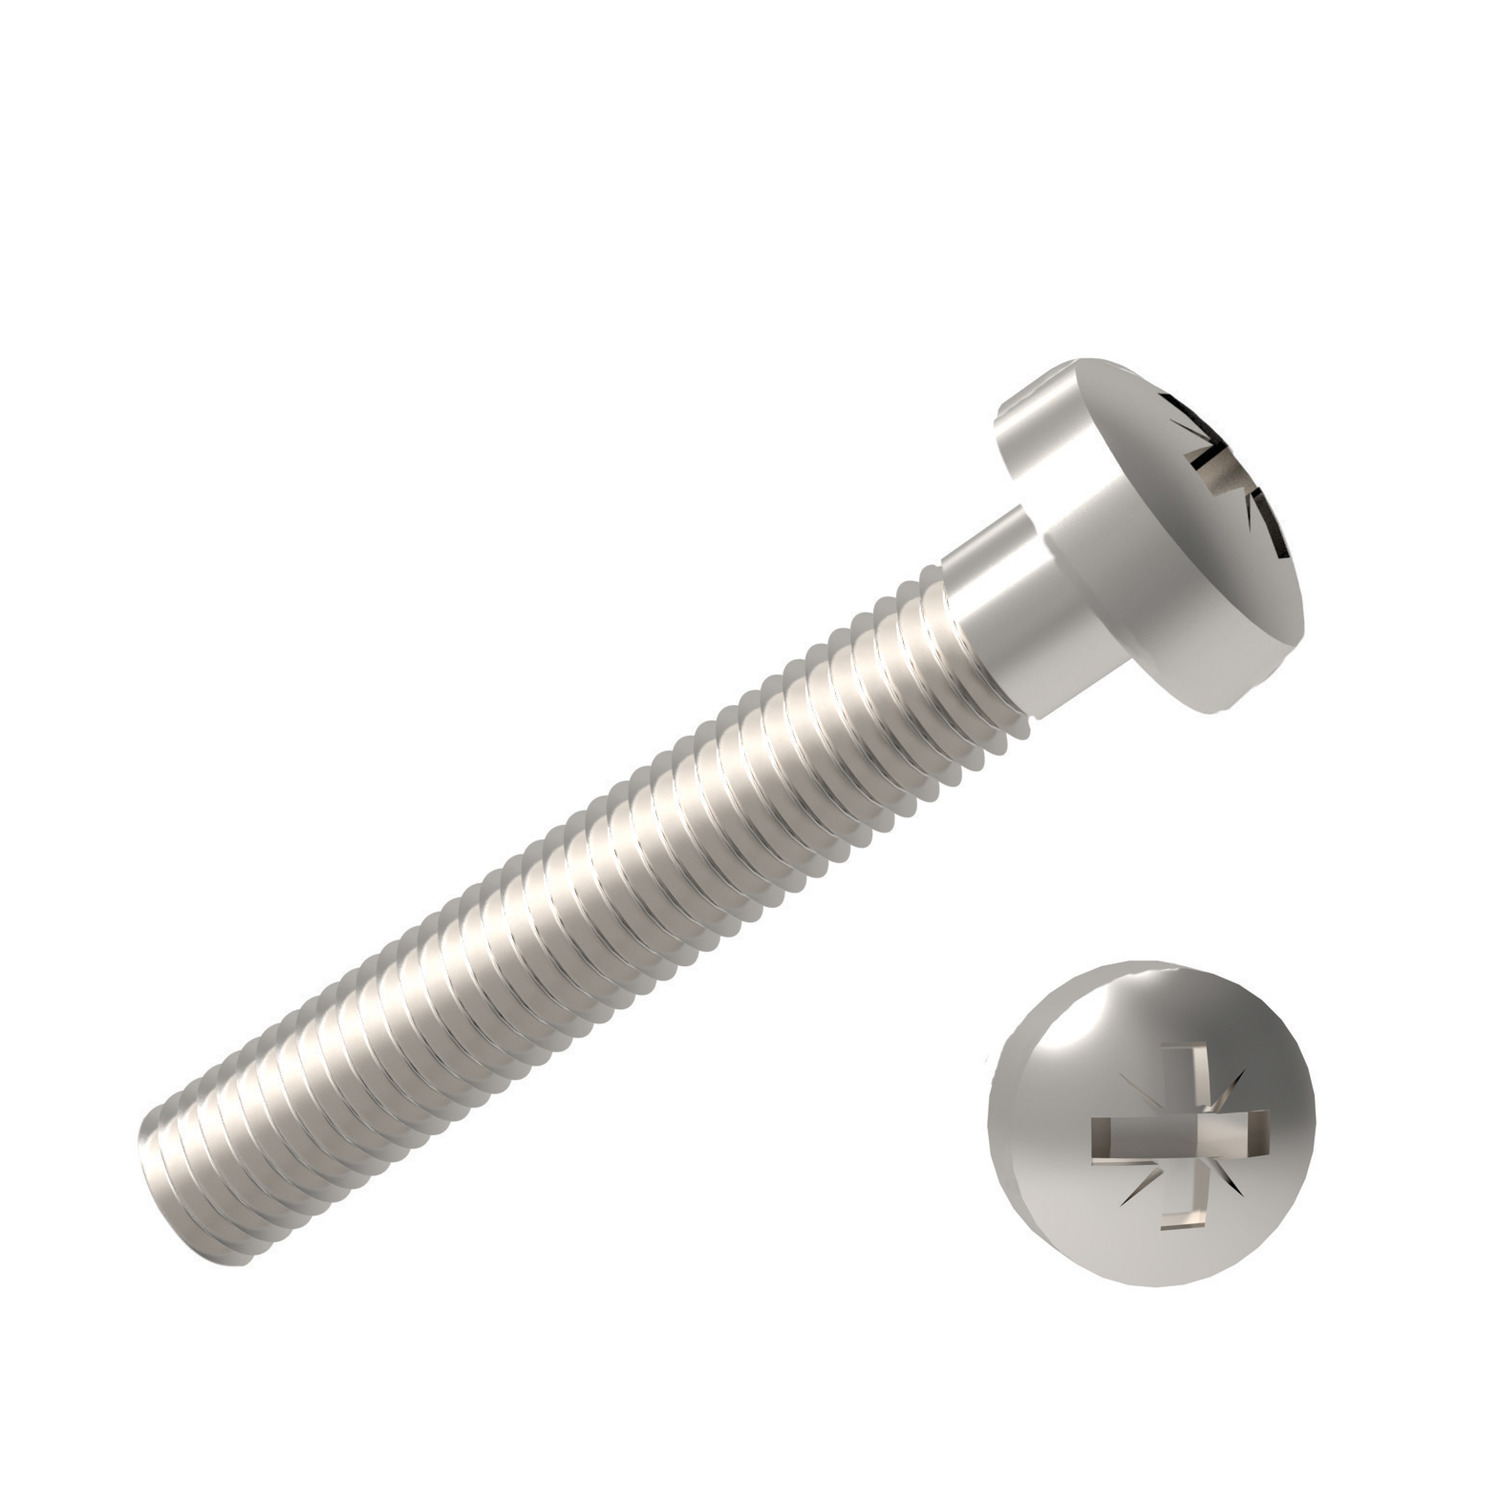 Pozi Pan Head Screws ZInc plated. To DIN 7985 Z, ISO 7045. Threaded within 2,5 x pitch of head.